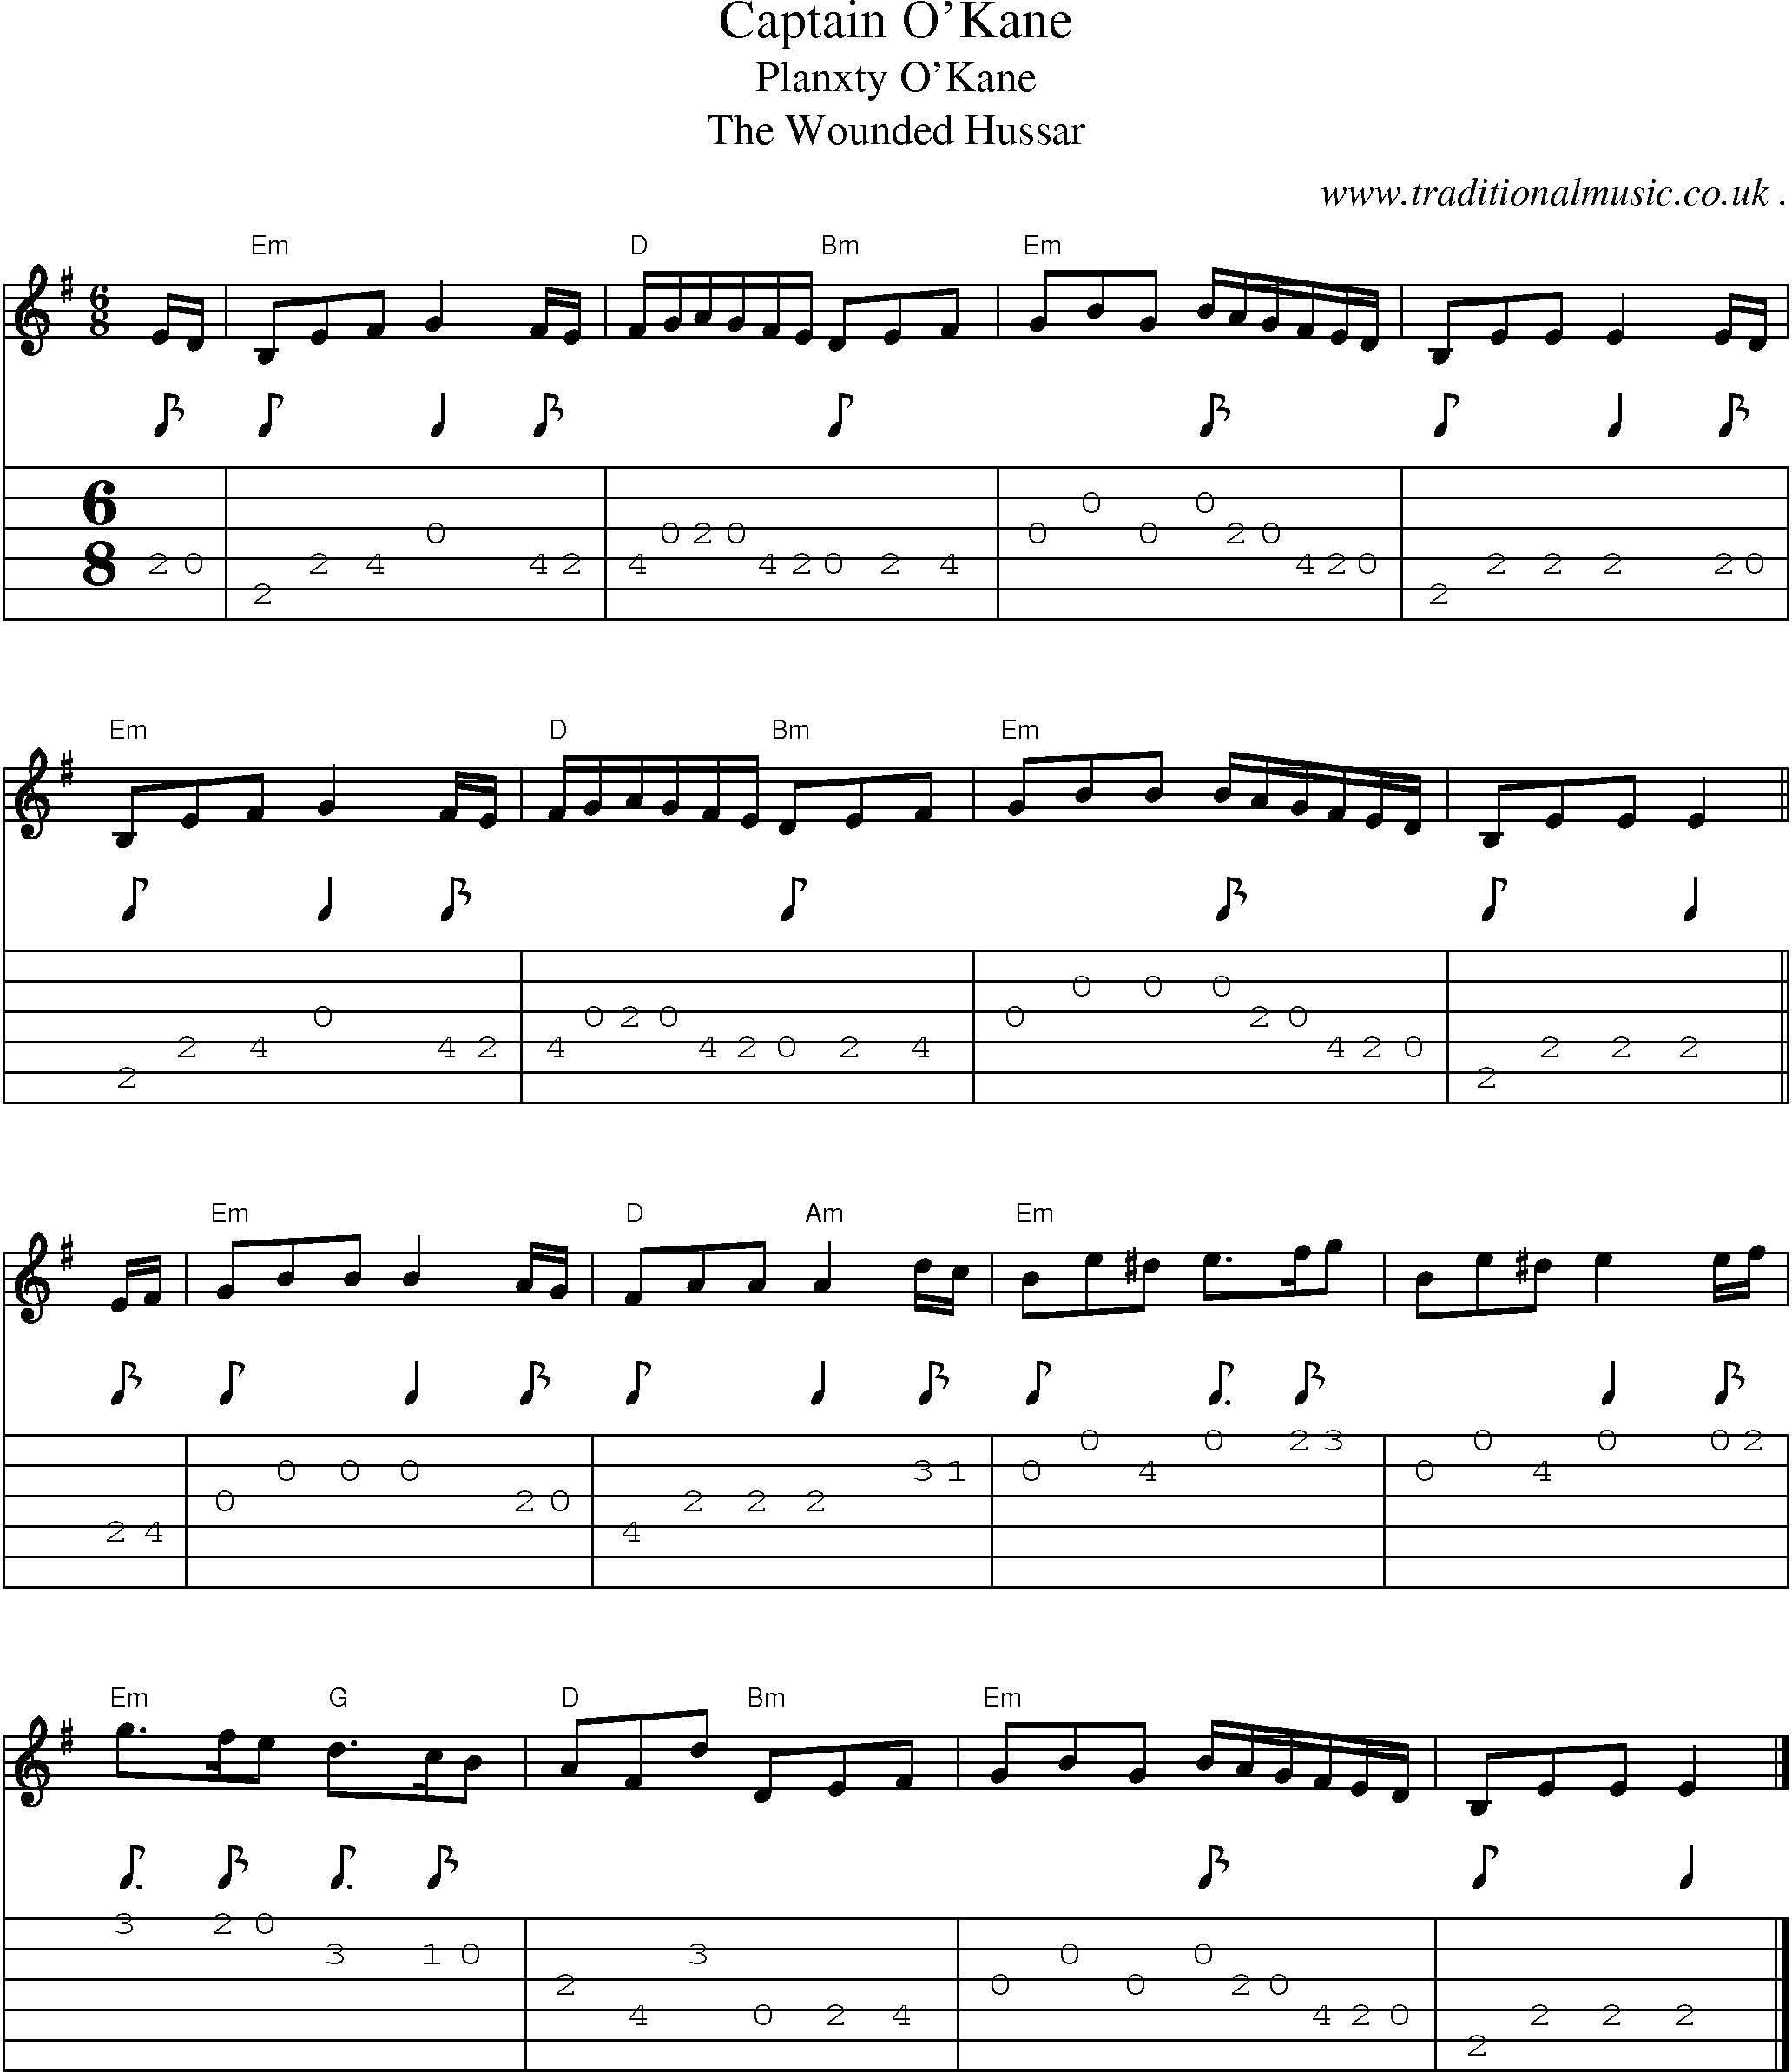 Music Score and Guitar Tabs for Captain OKane